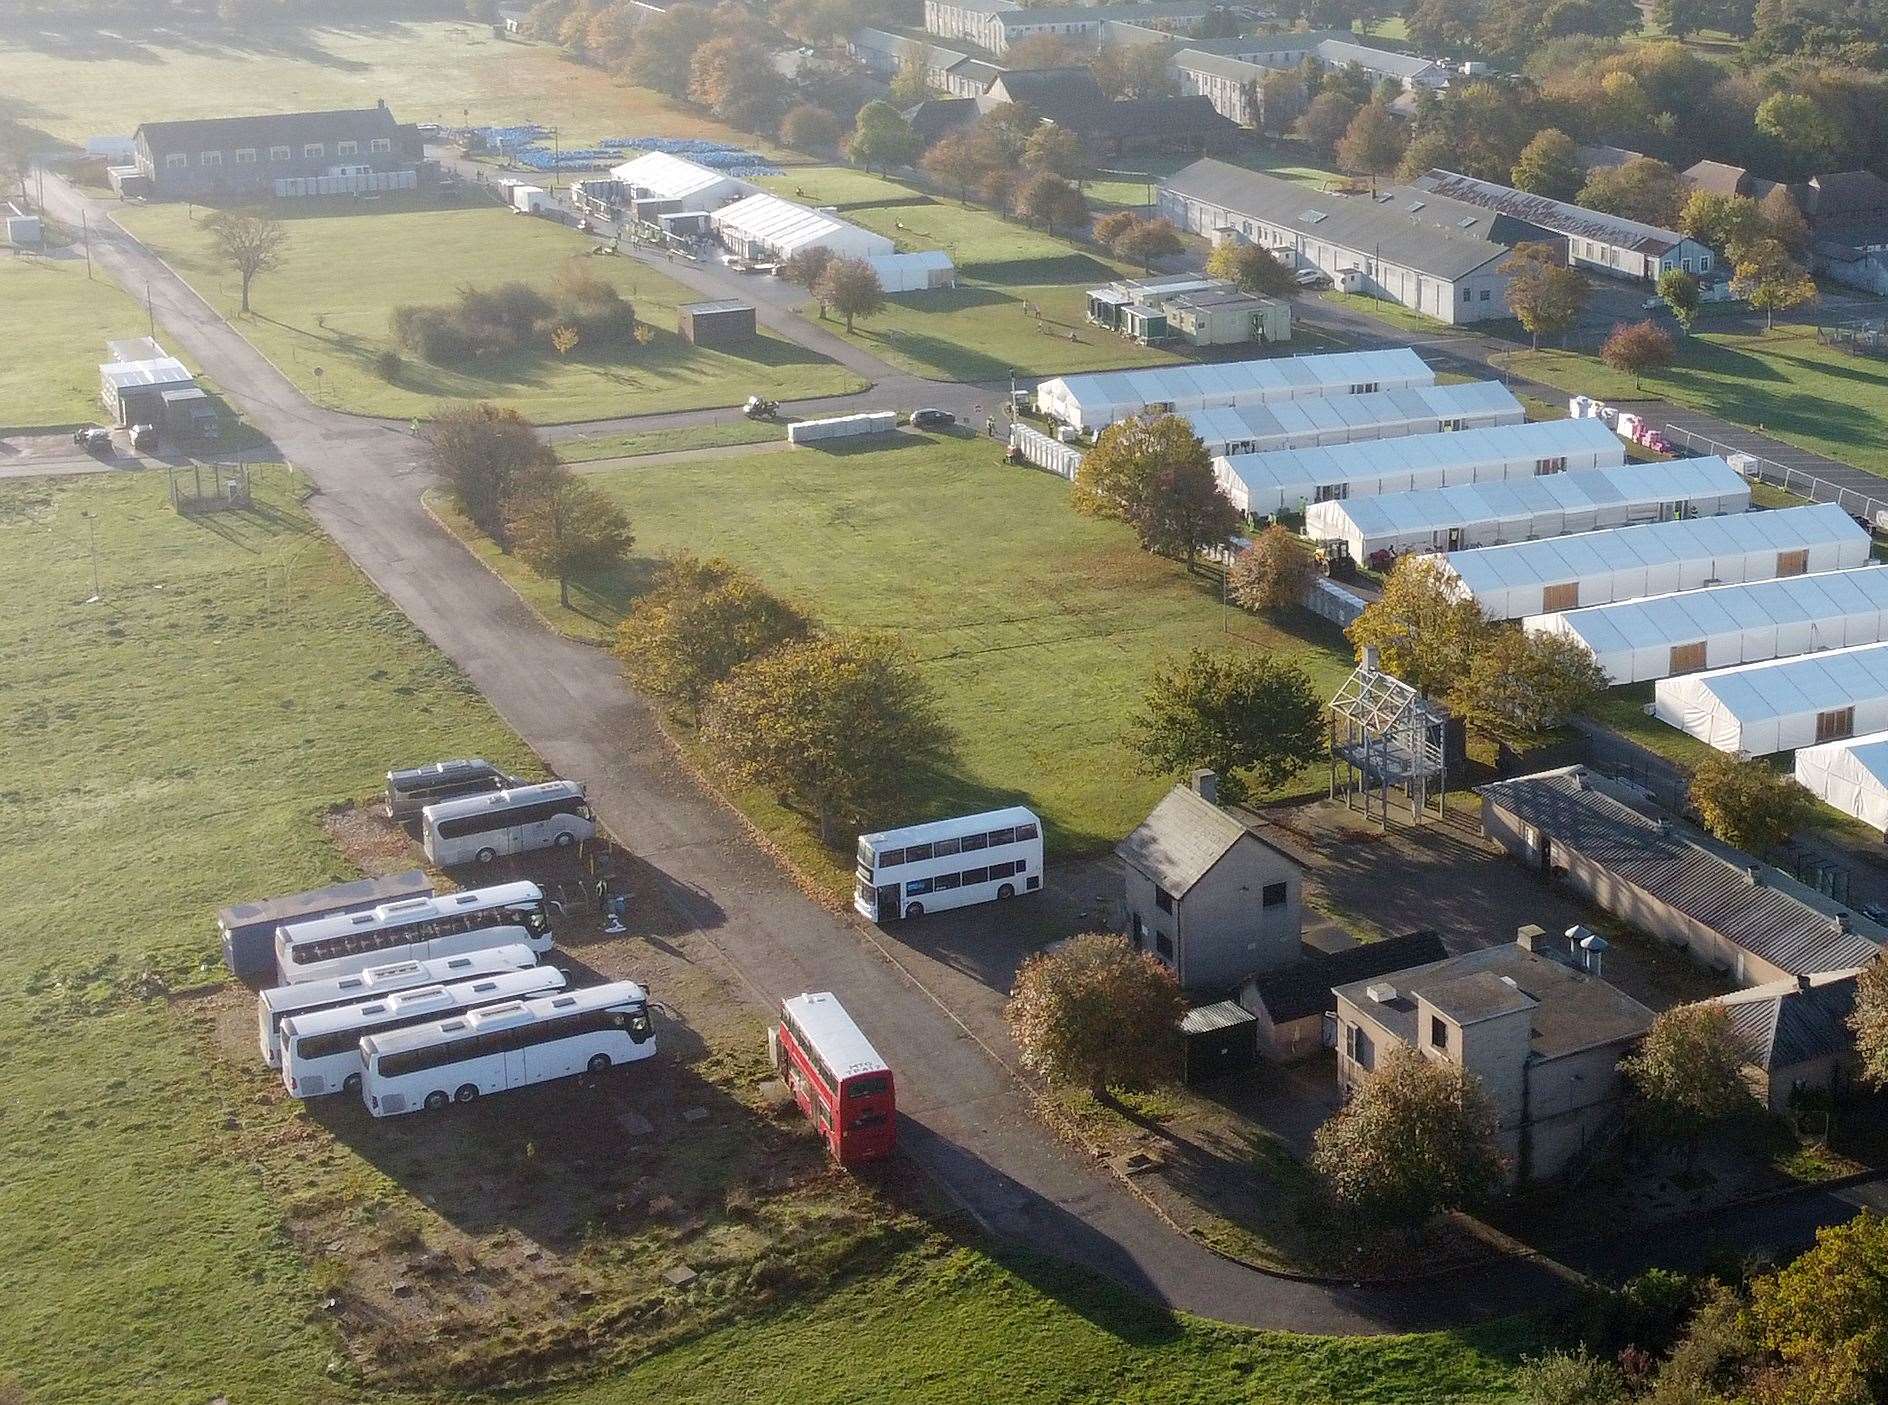 The Manston immigration short-term holding facility